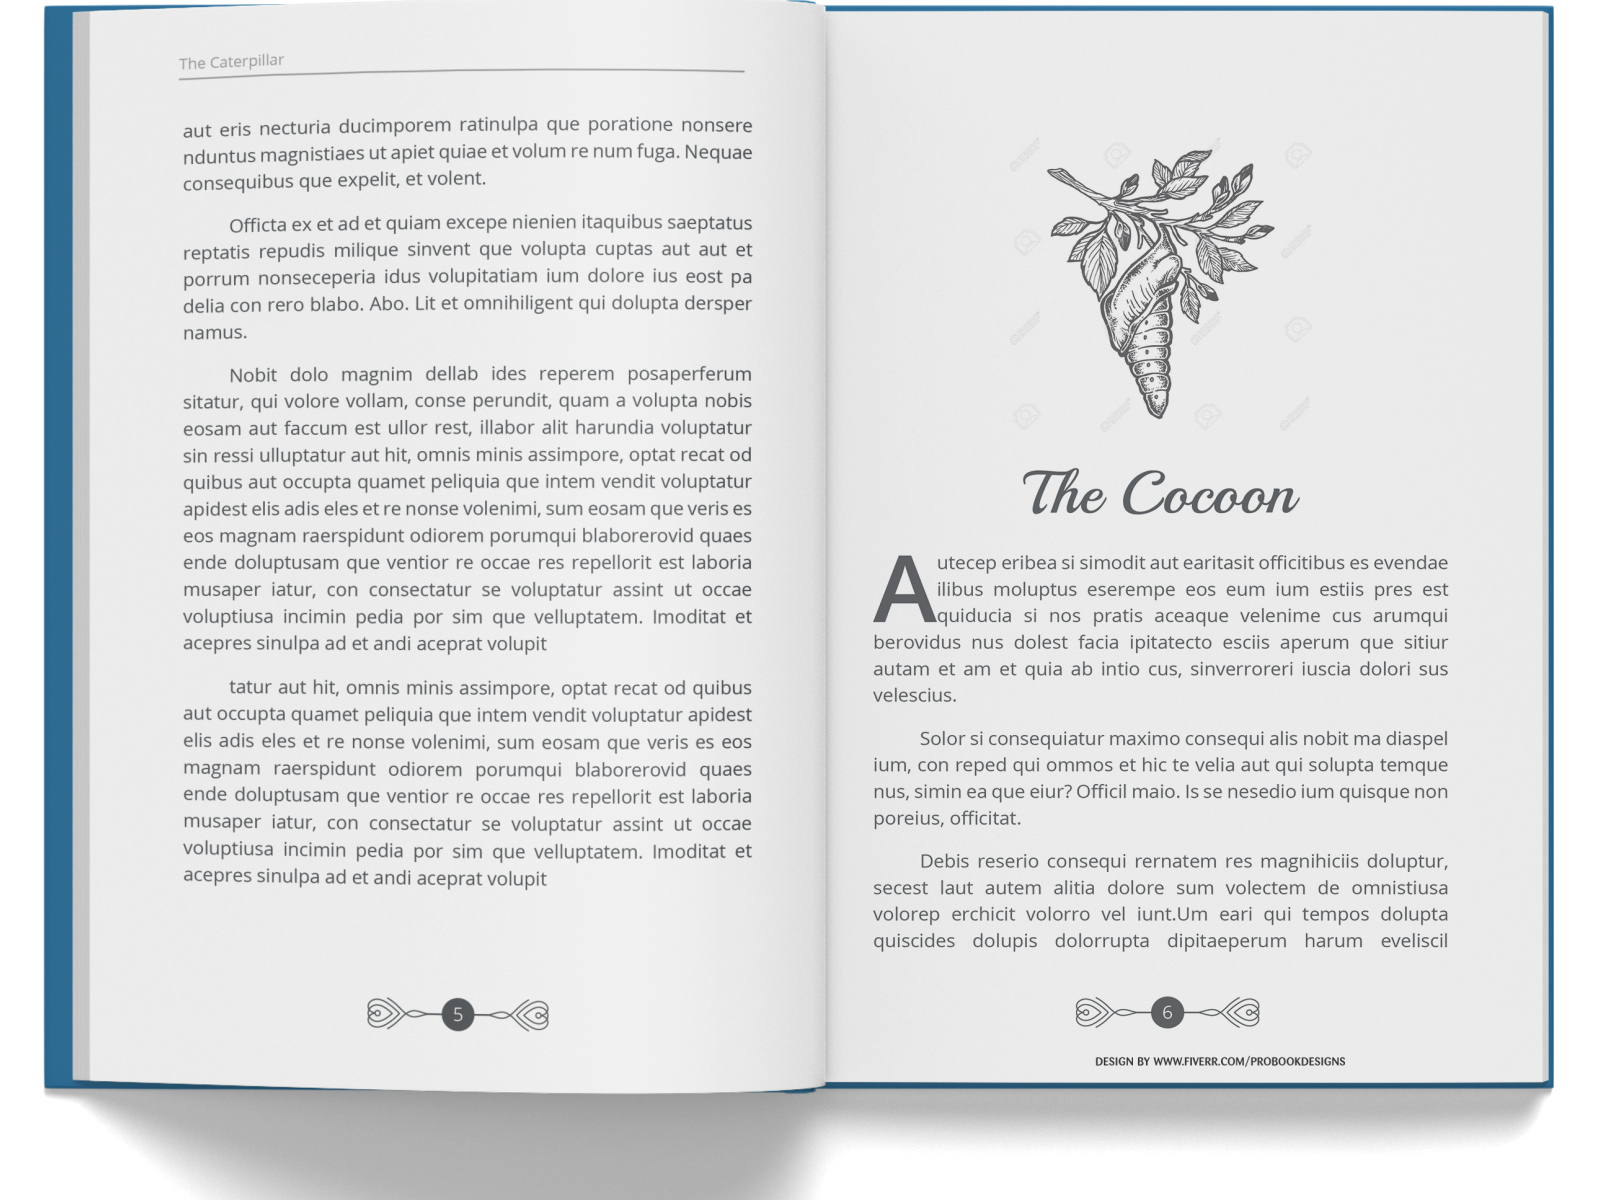 Book Template: 9 Free Book Layout Templates for Word & More